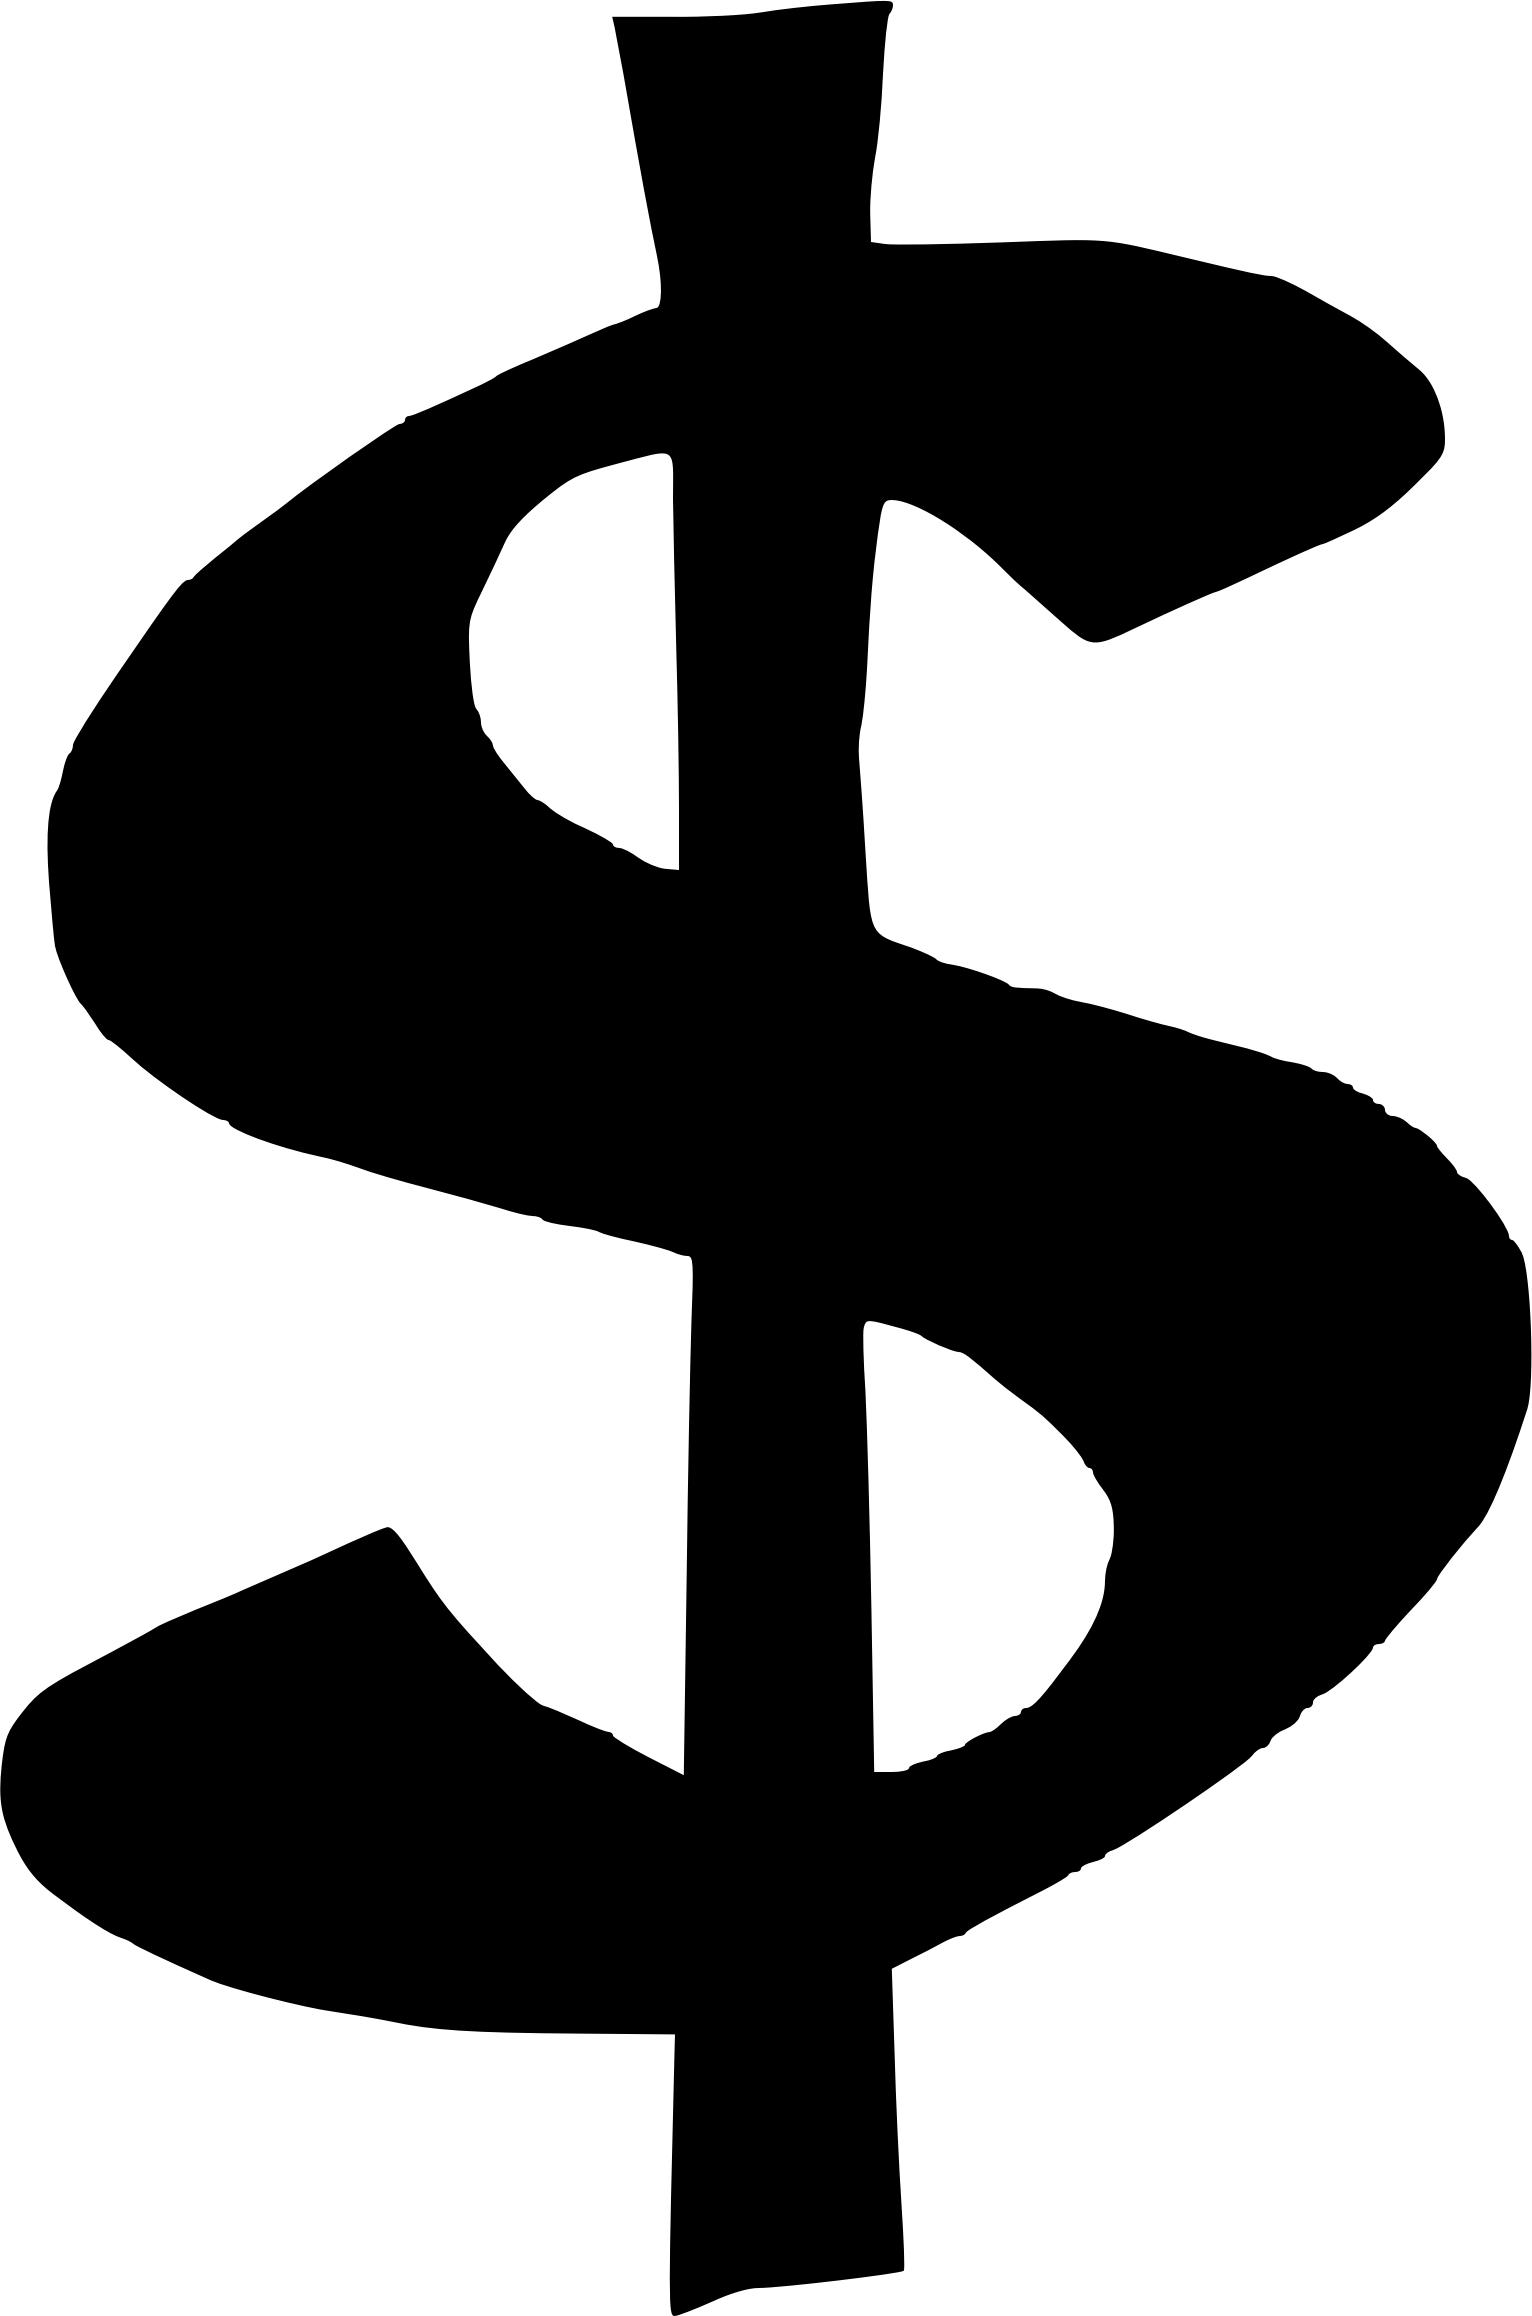 Money 1 PNG icons